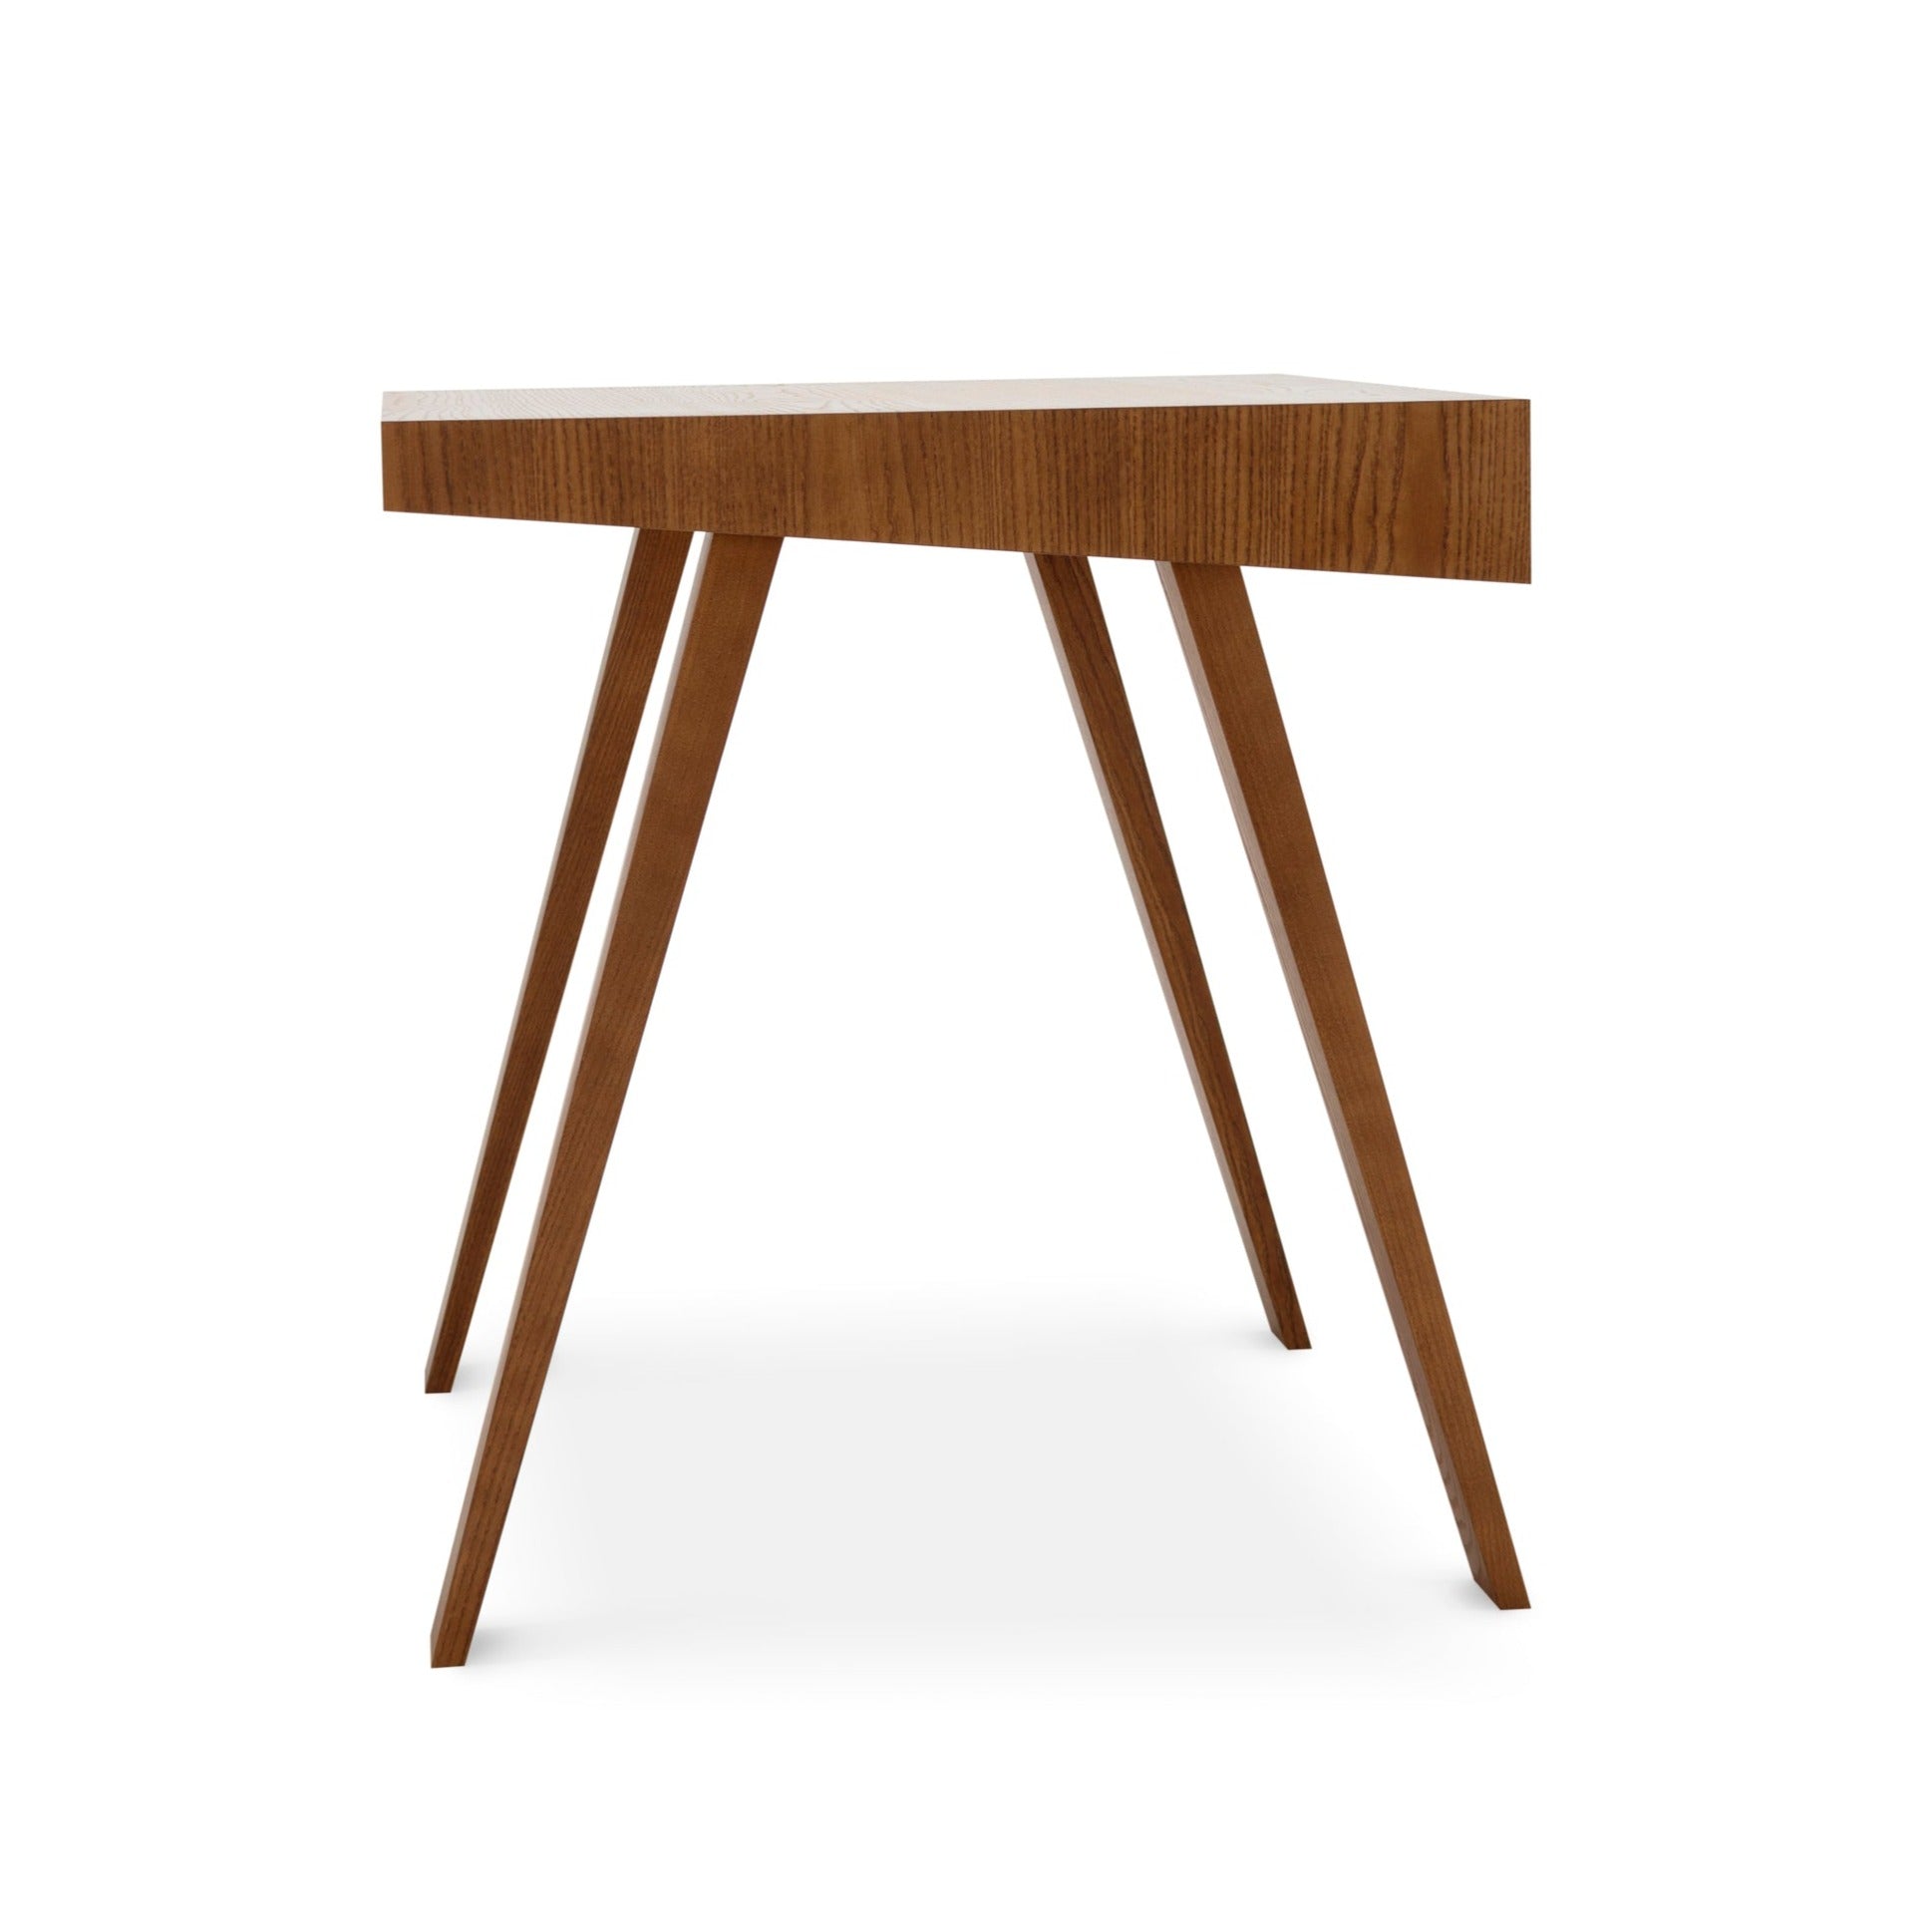 4.9 Desk brown ash-side view-small size